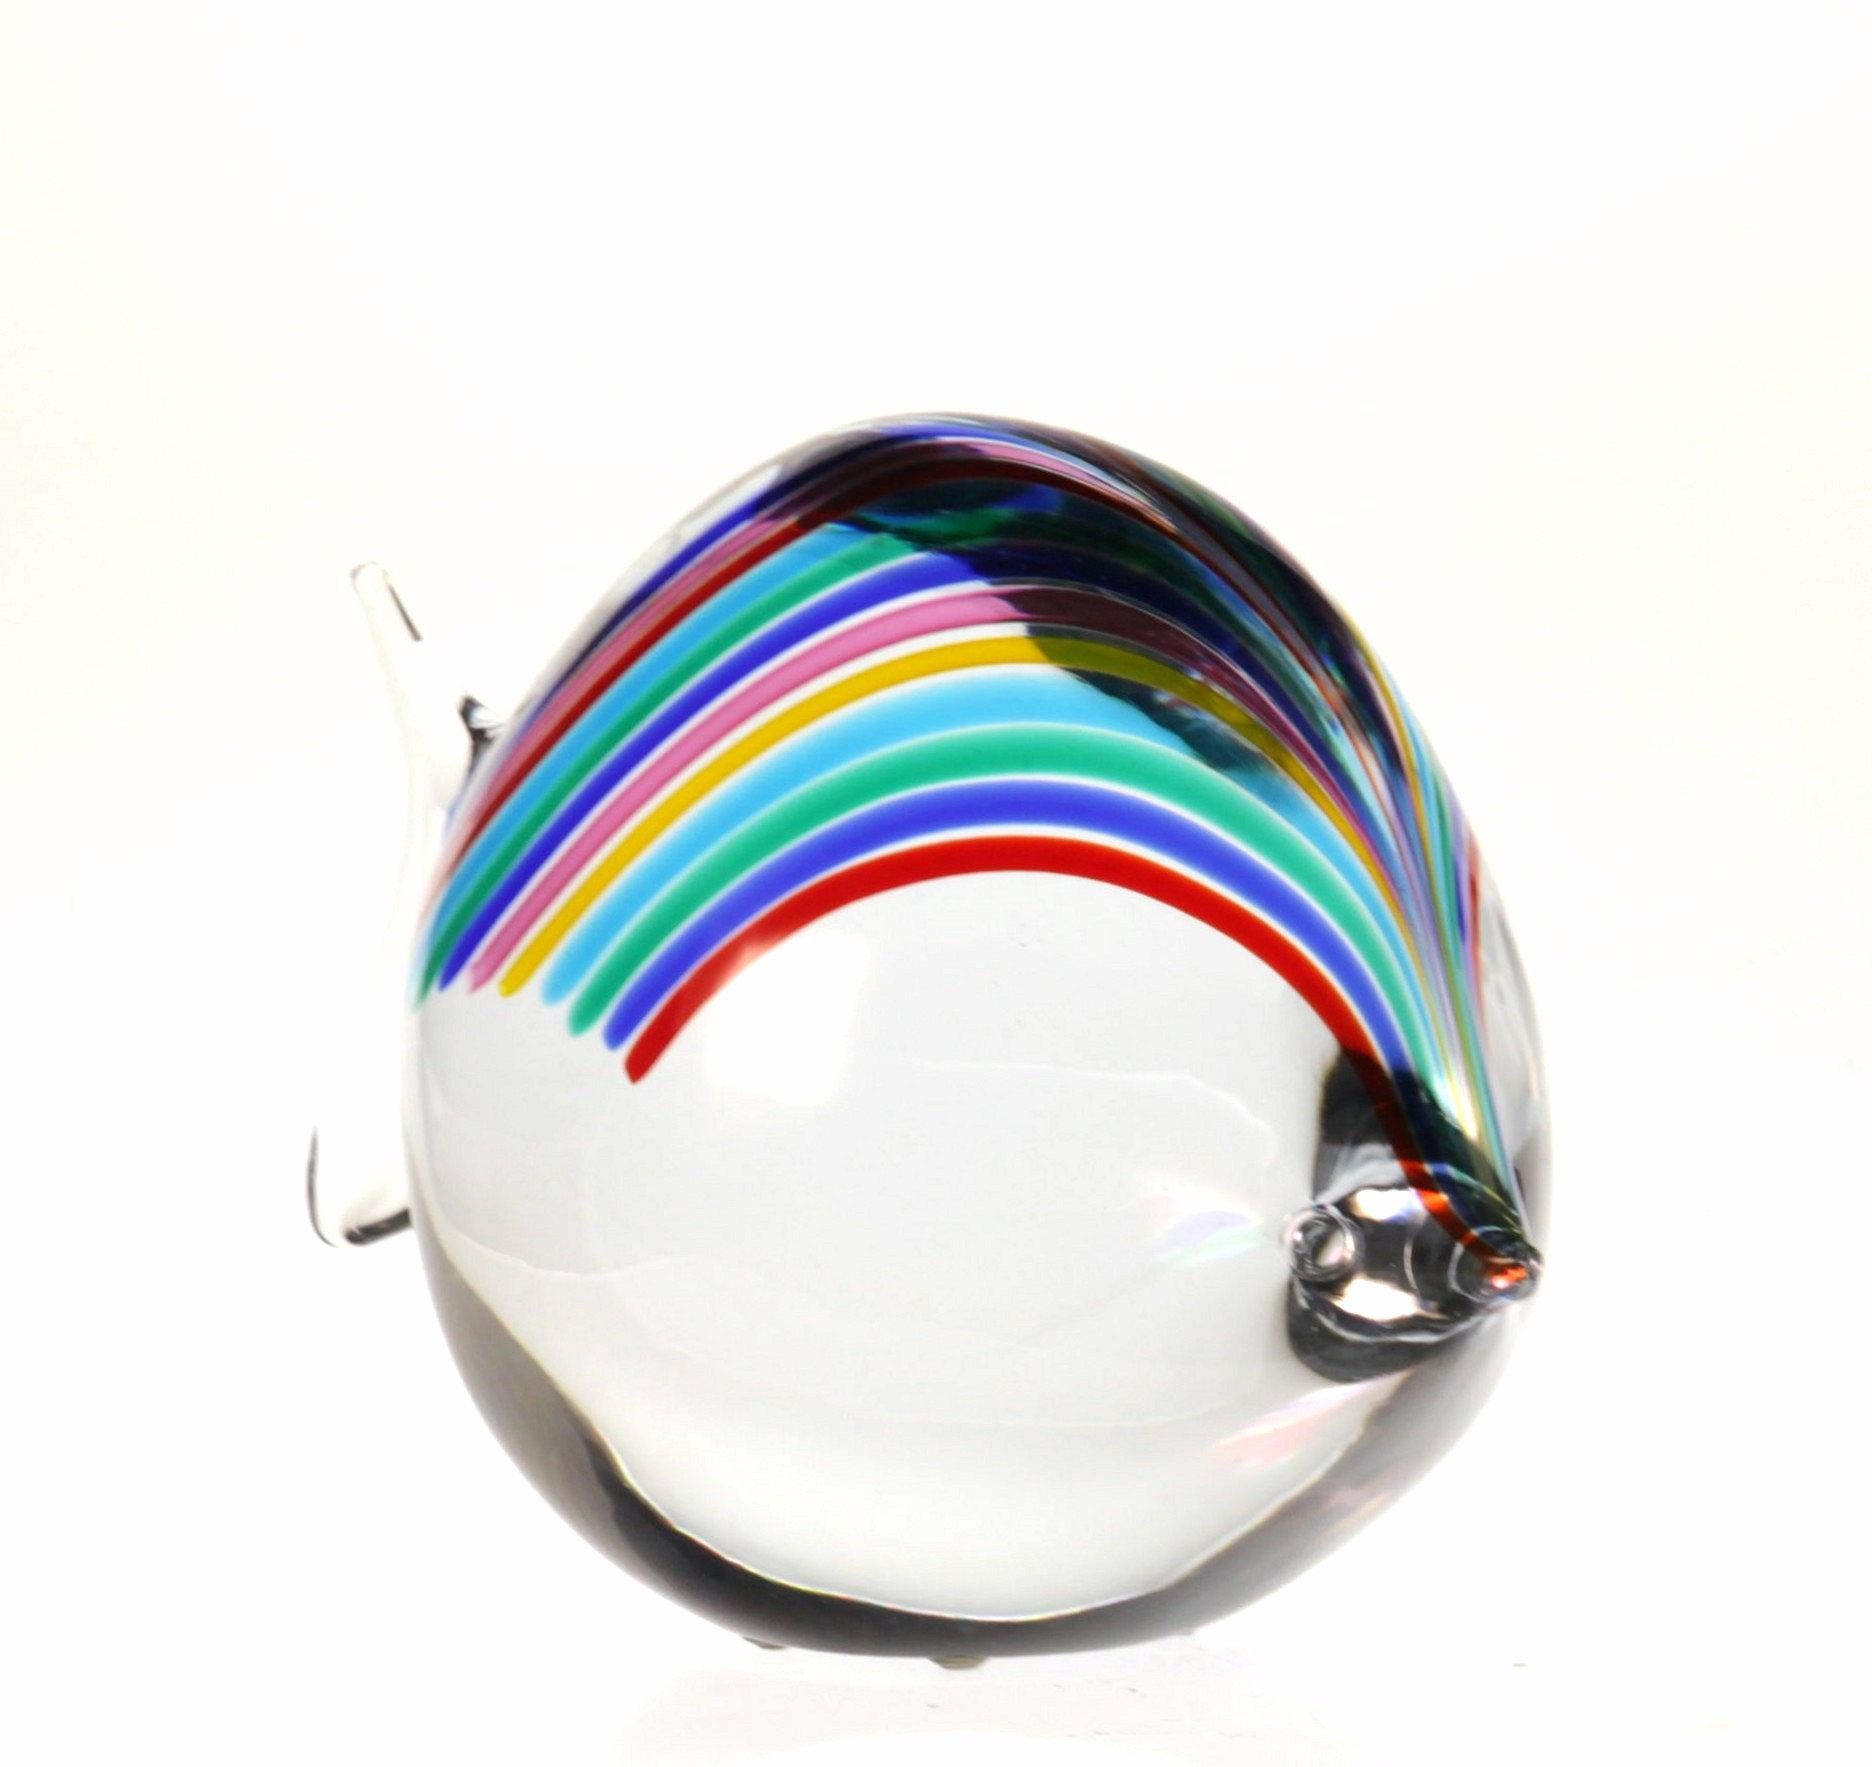 Massiccio fish with the rainbow cane sequence of Livio Seguso. This sequence was used in several pieces, bowls to be highlighted with lens effect of the piece.

The fish body acts like a magnifying lens and the colors are moving when looking at